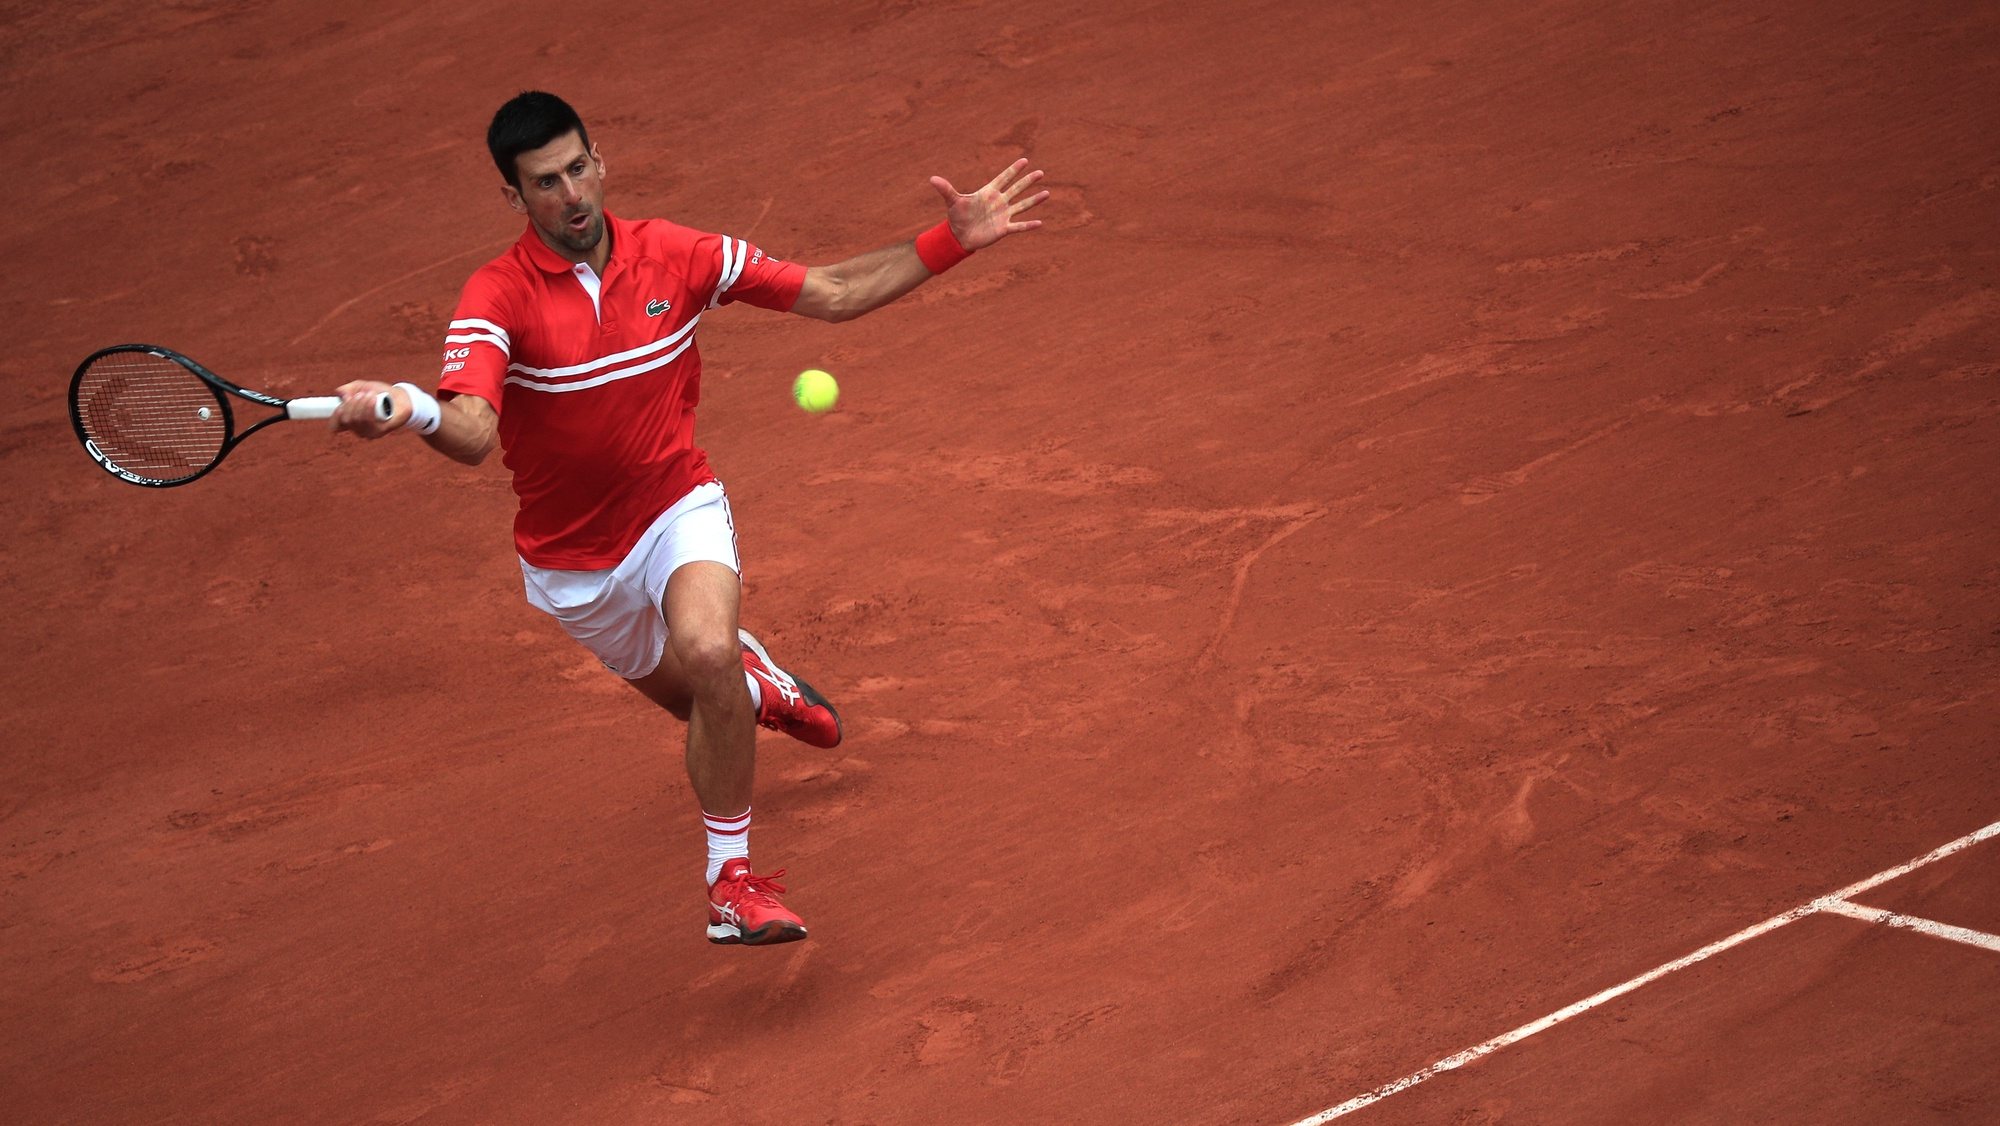 epa09249485 Novak Djokovic of Serbia in action against Ricardas Berankis of Lithuania during their third round match at the French Open tennis tournament at Roland Garros in Paris, France, 05 June 2021.  EPA/CHRISTOPHE PETIT TESSON